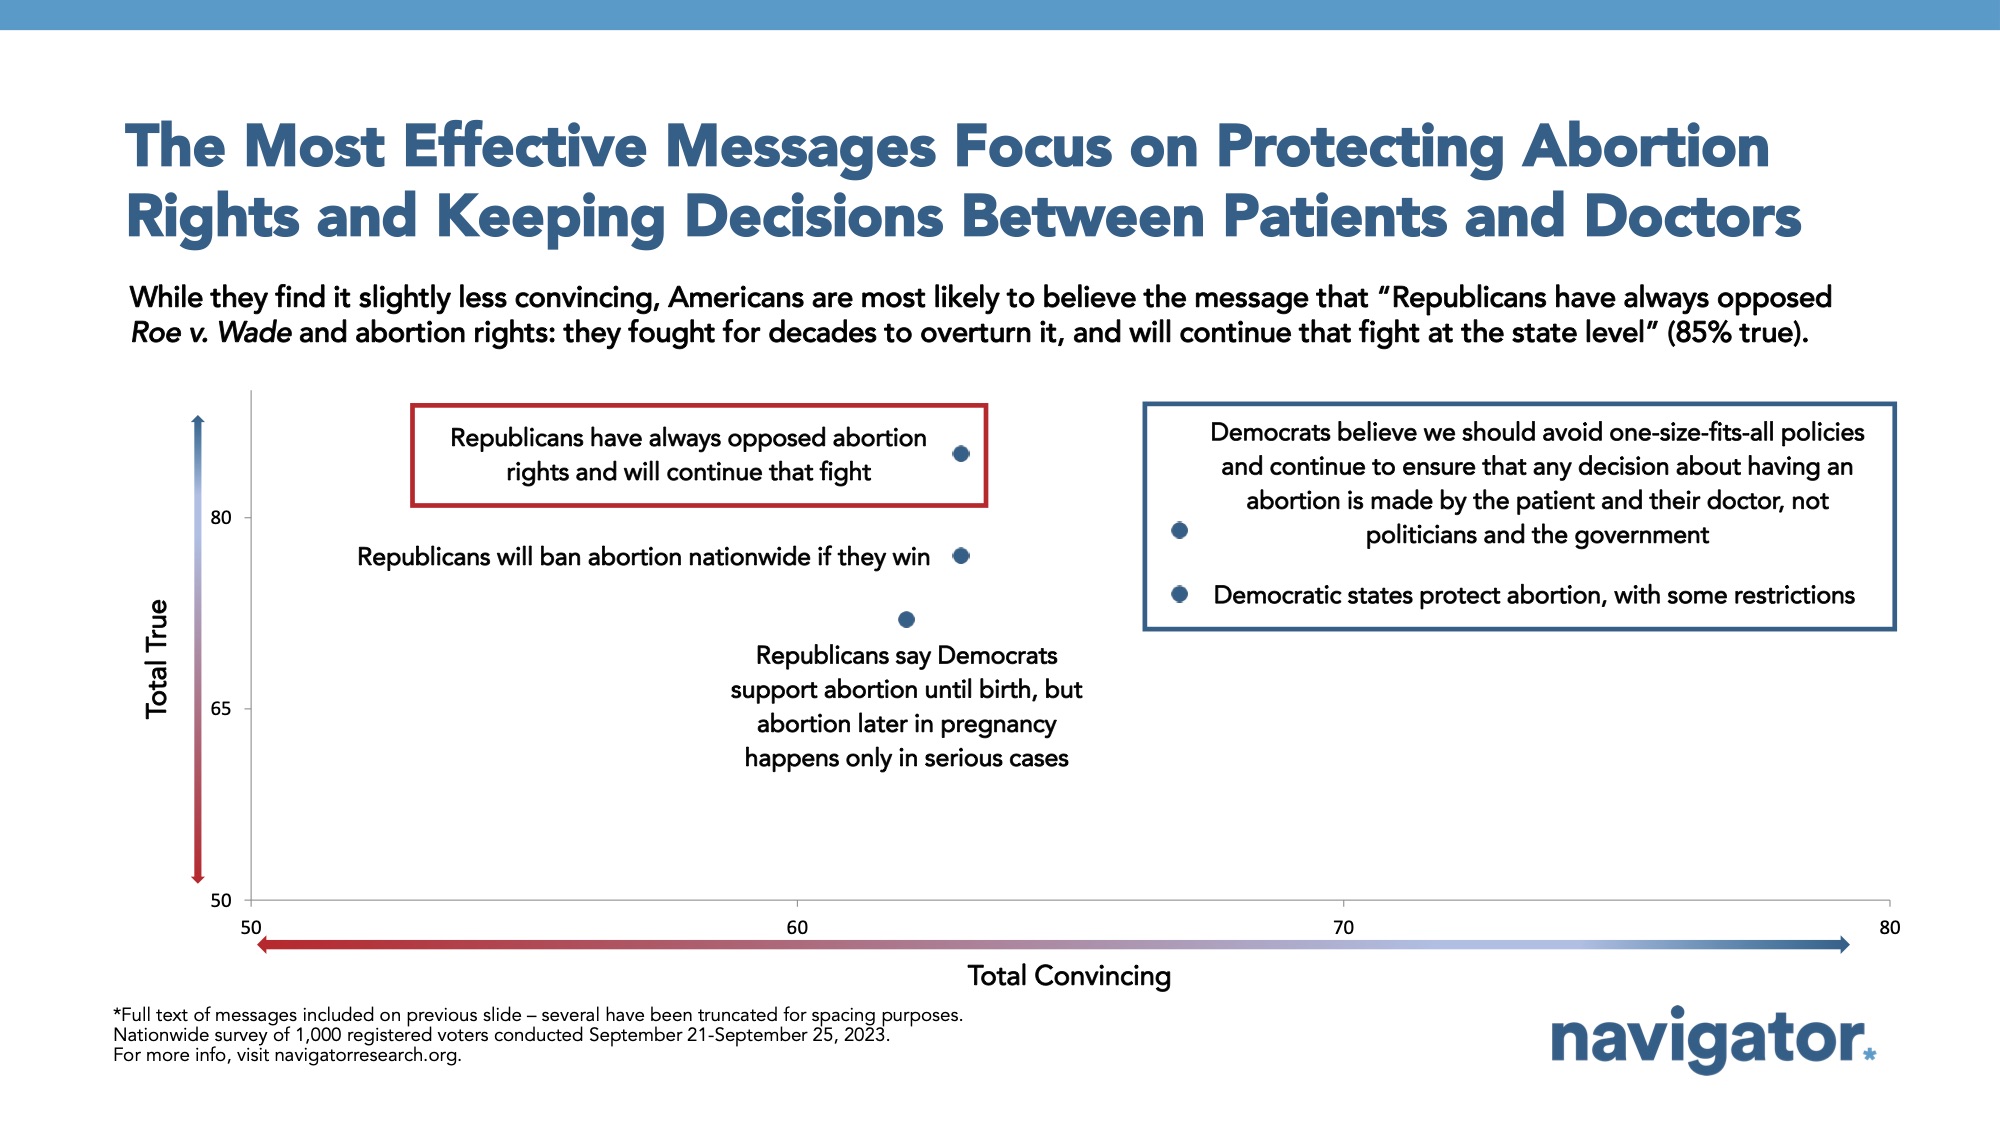 Focus group report slide titled: The Most Effective Messages Focus on Protecting Abortion Rights and Keeping Decisions Between Patients and Doctors